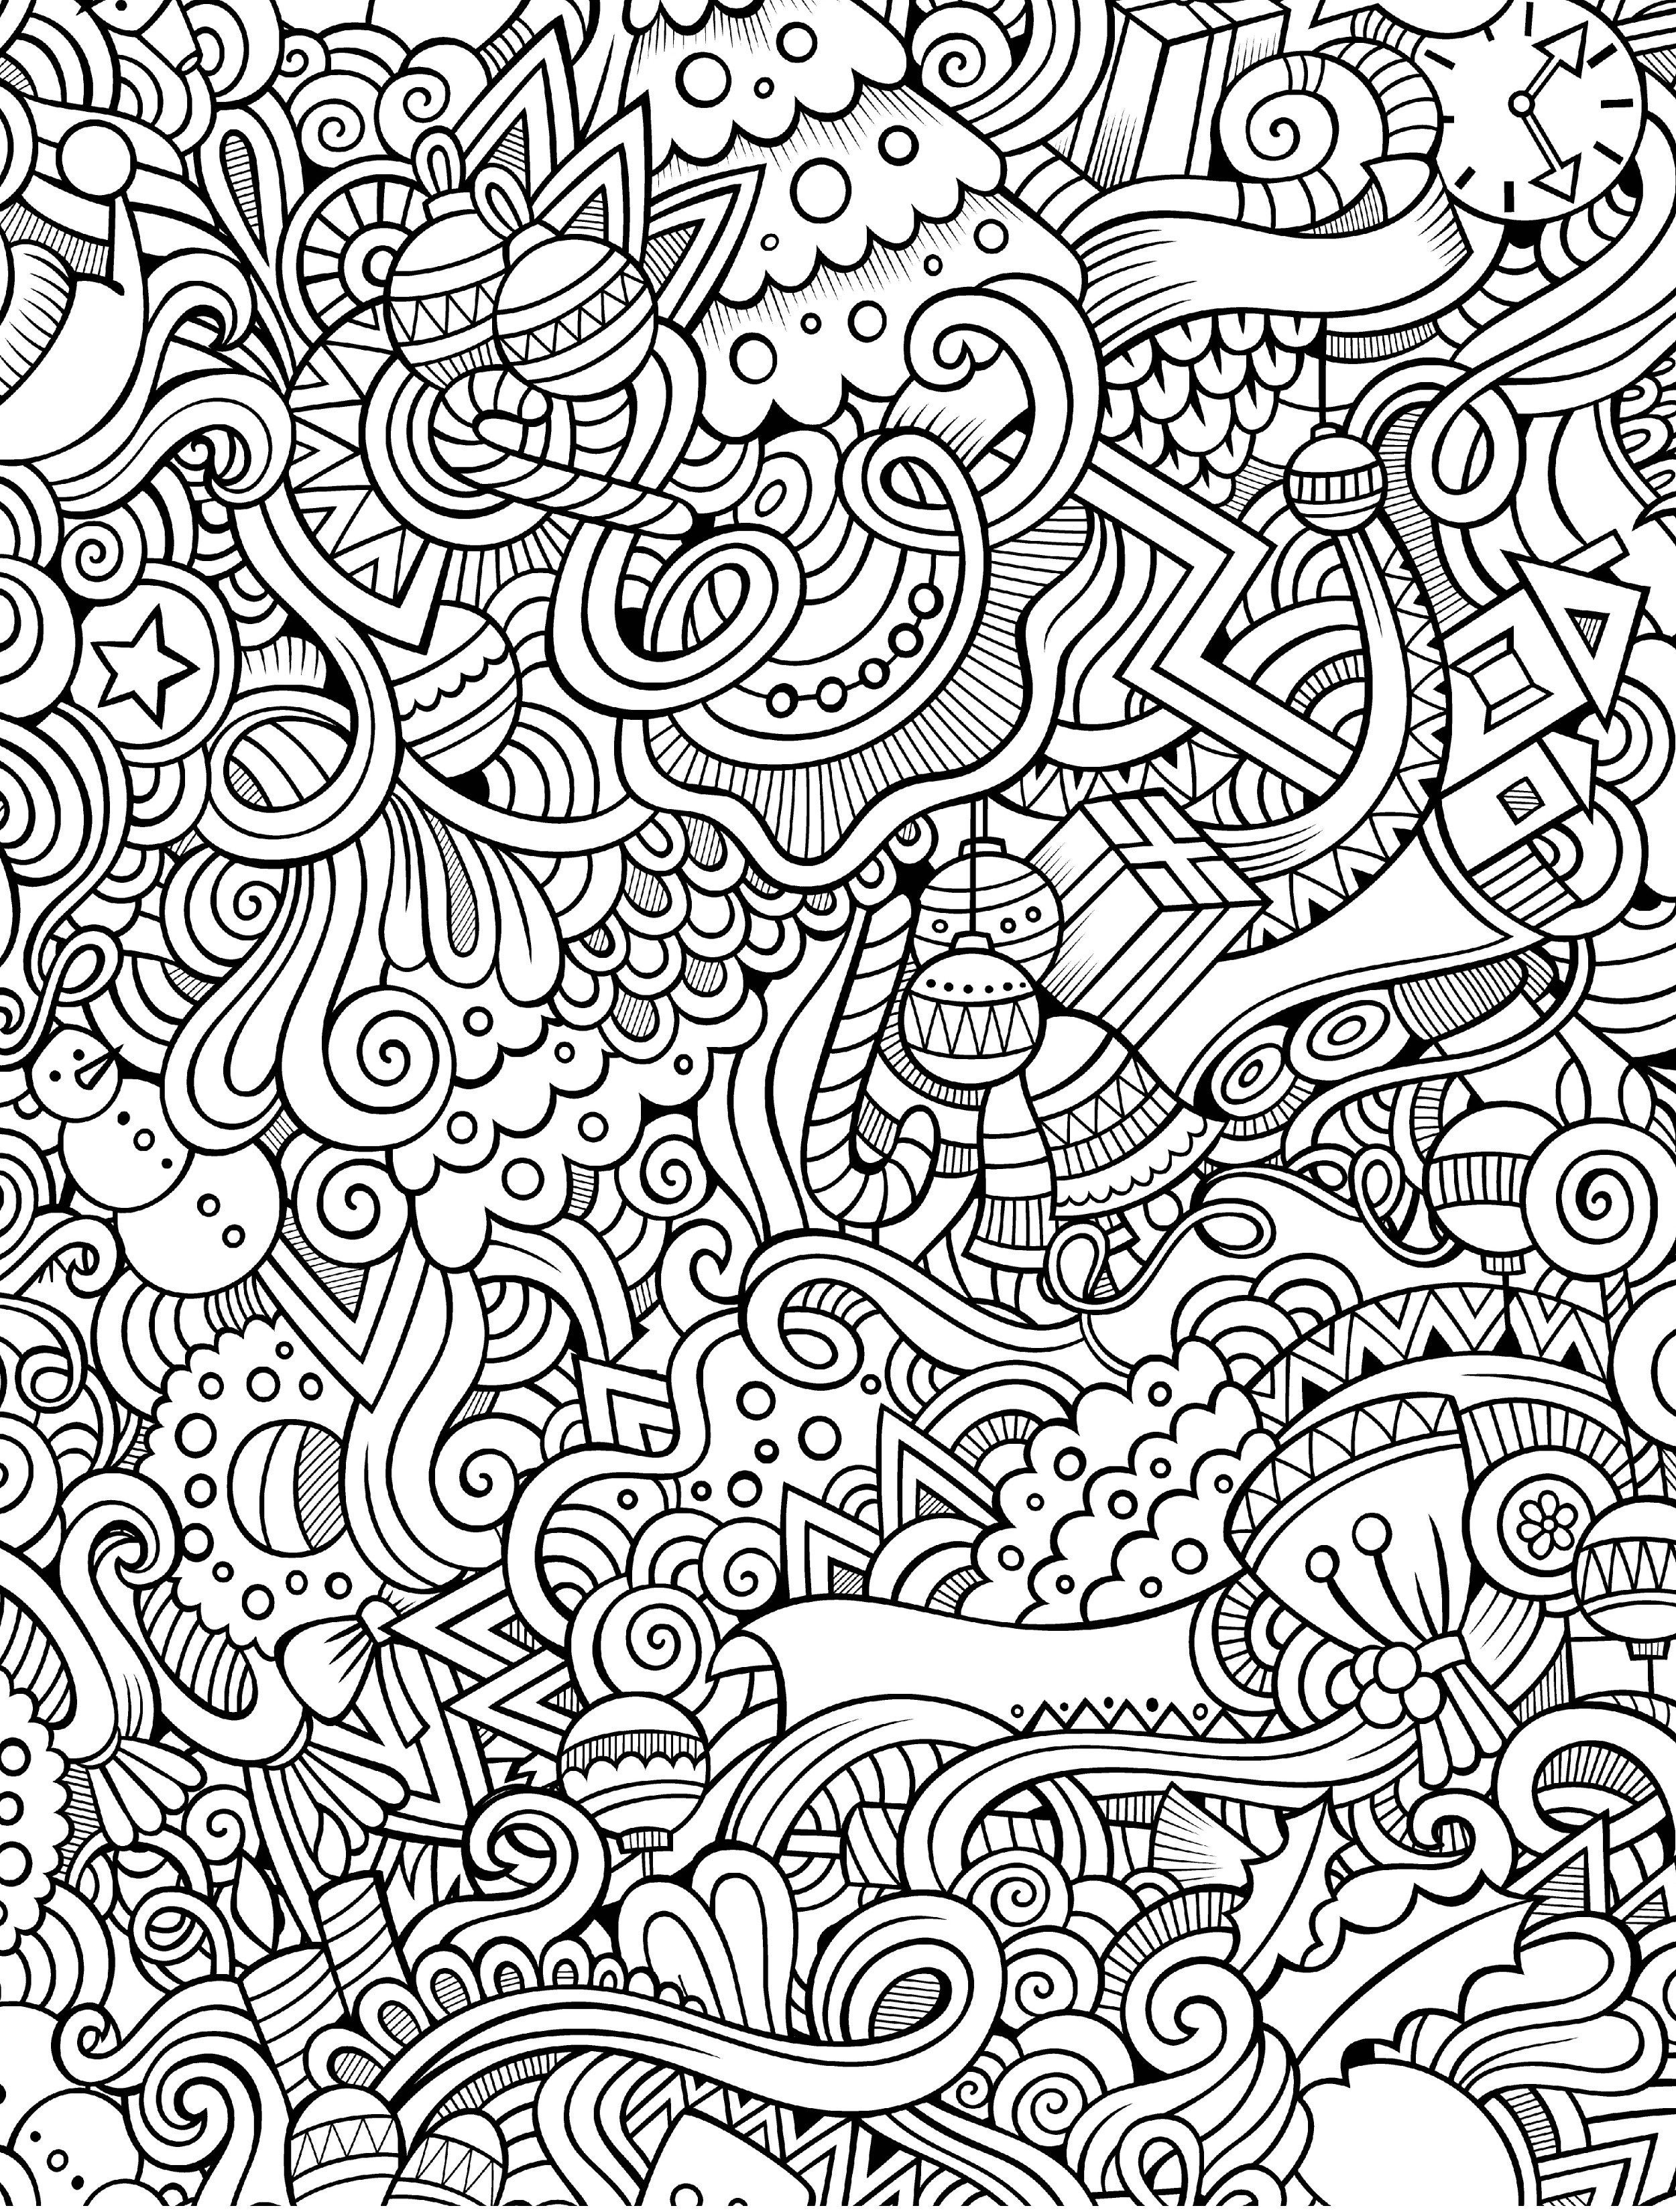 10 Free Printable Holiday Adult Coloring Pages | Coloring Pages - Free Printable Coloring Pages For Adults